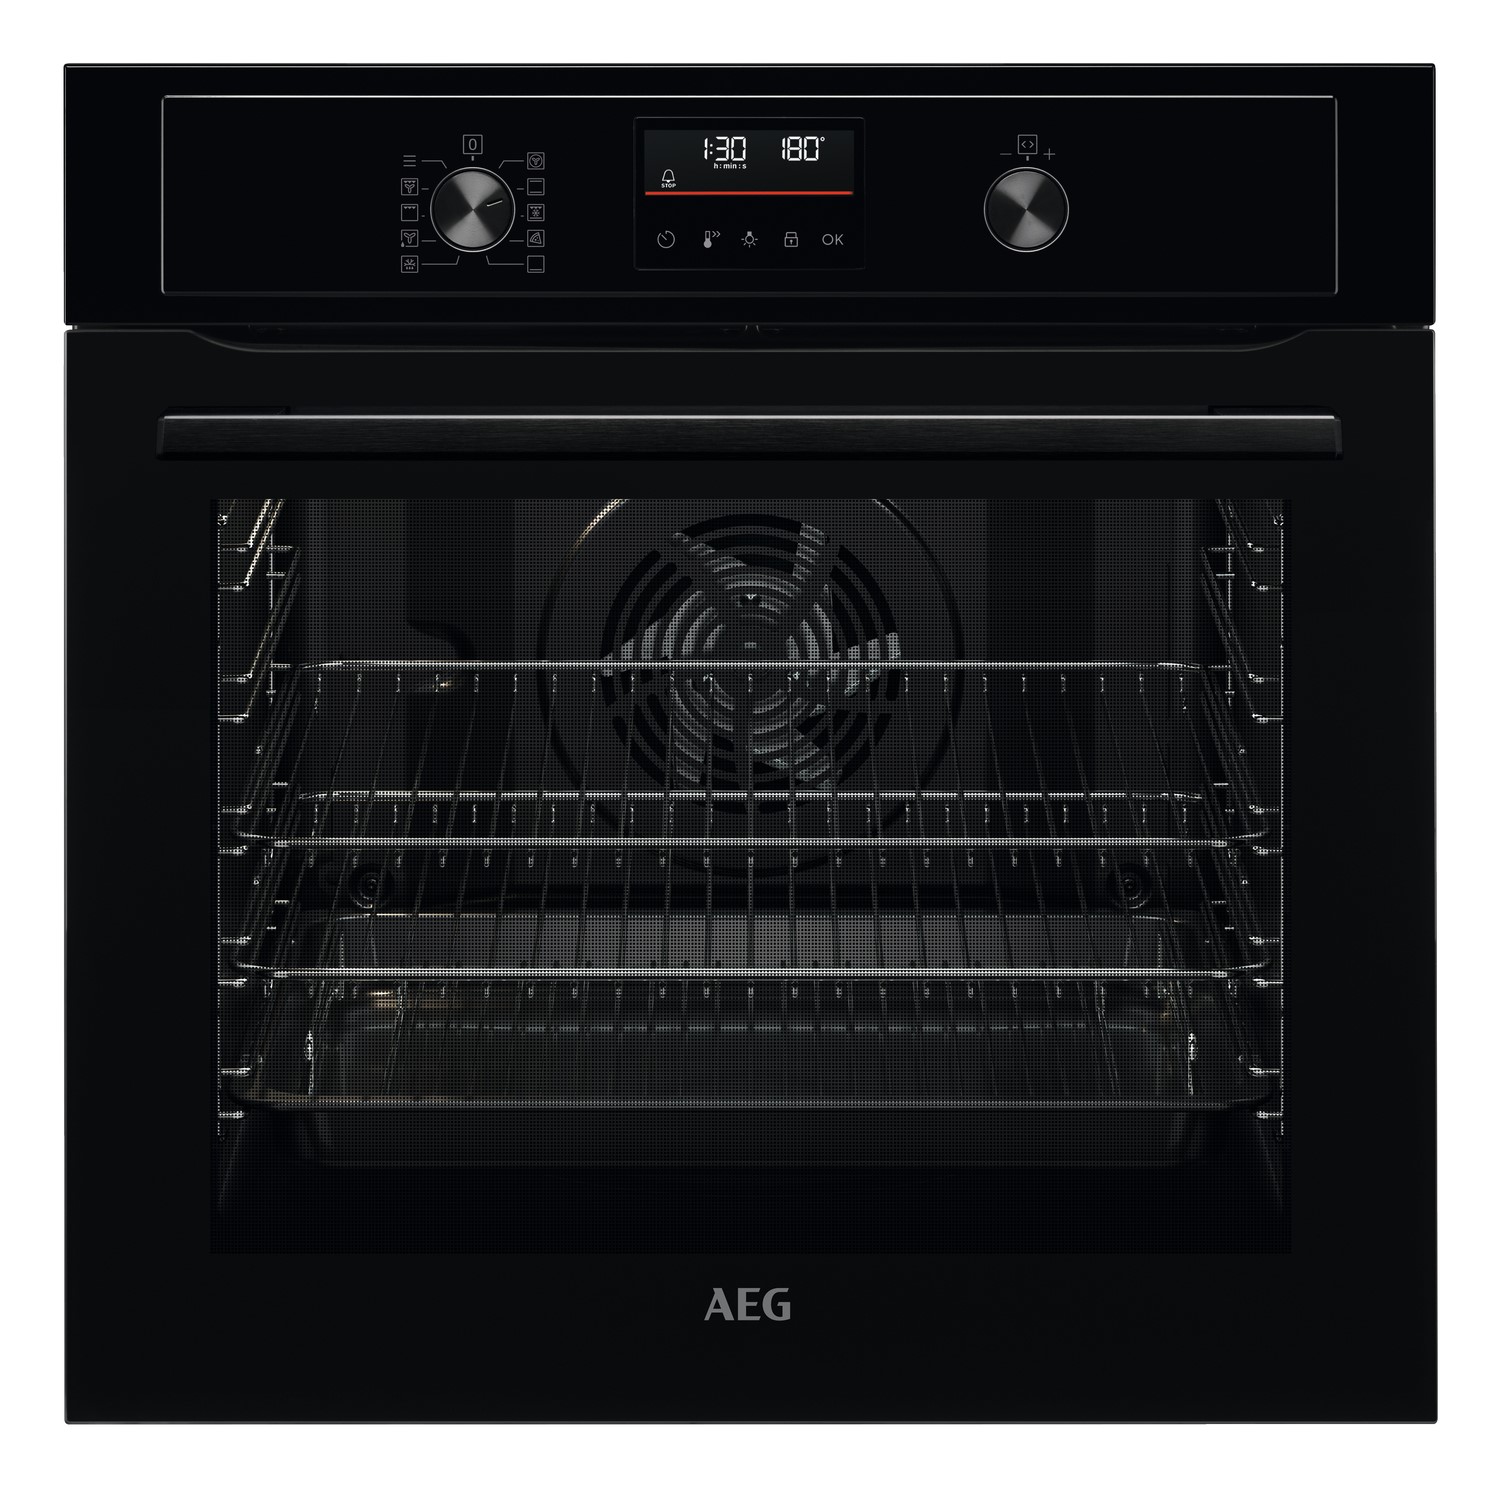 Photos - Other for Computer AEG Series 6000 Electric Single Oven - Black 949498304 